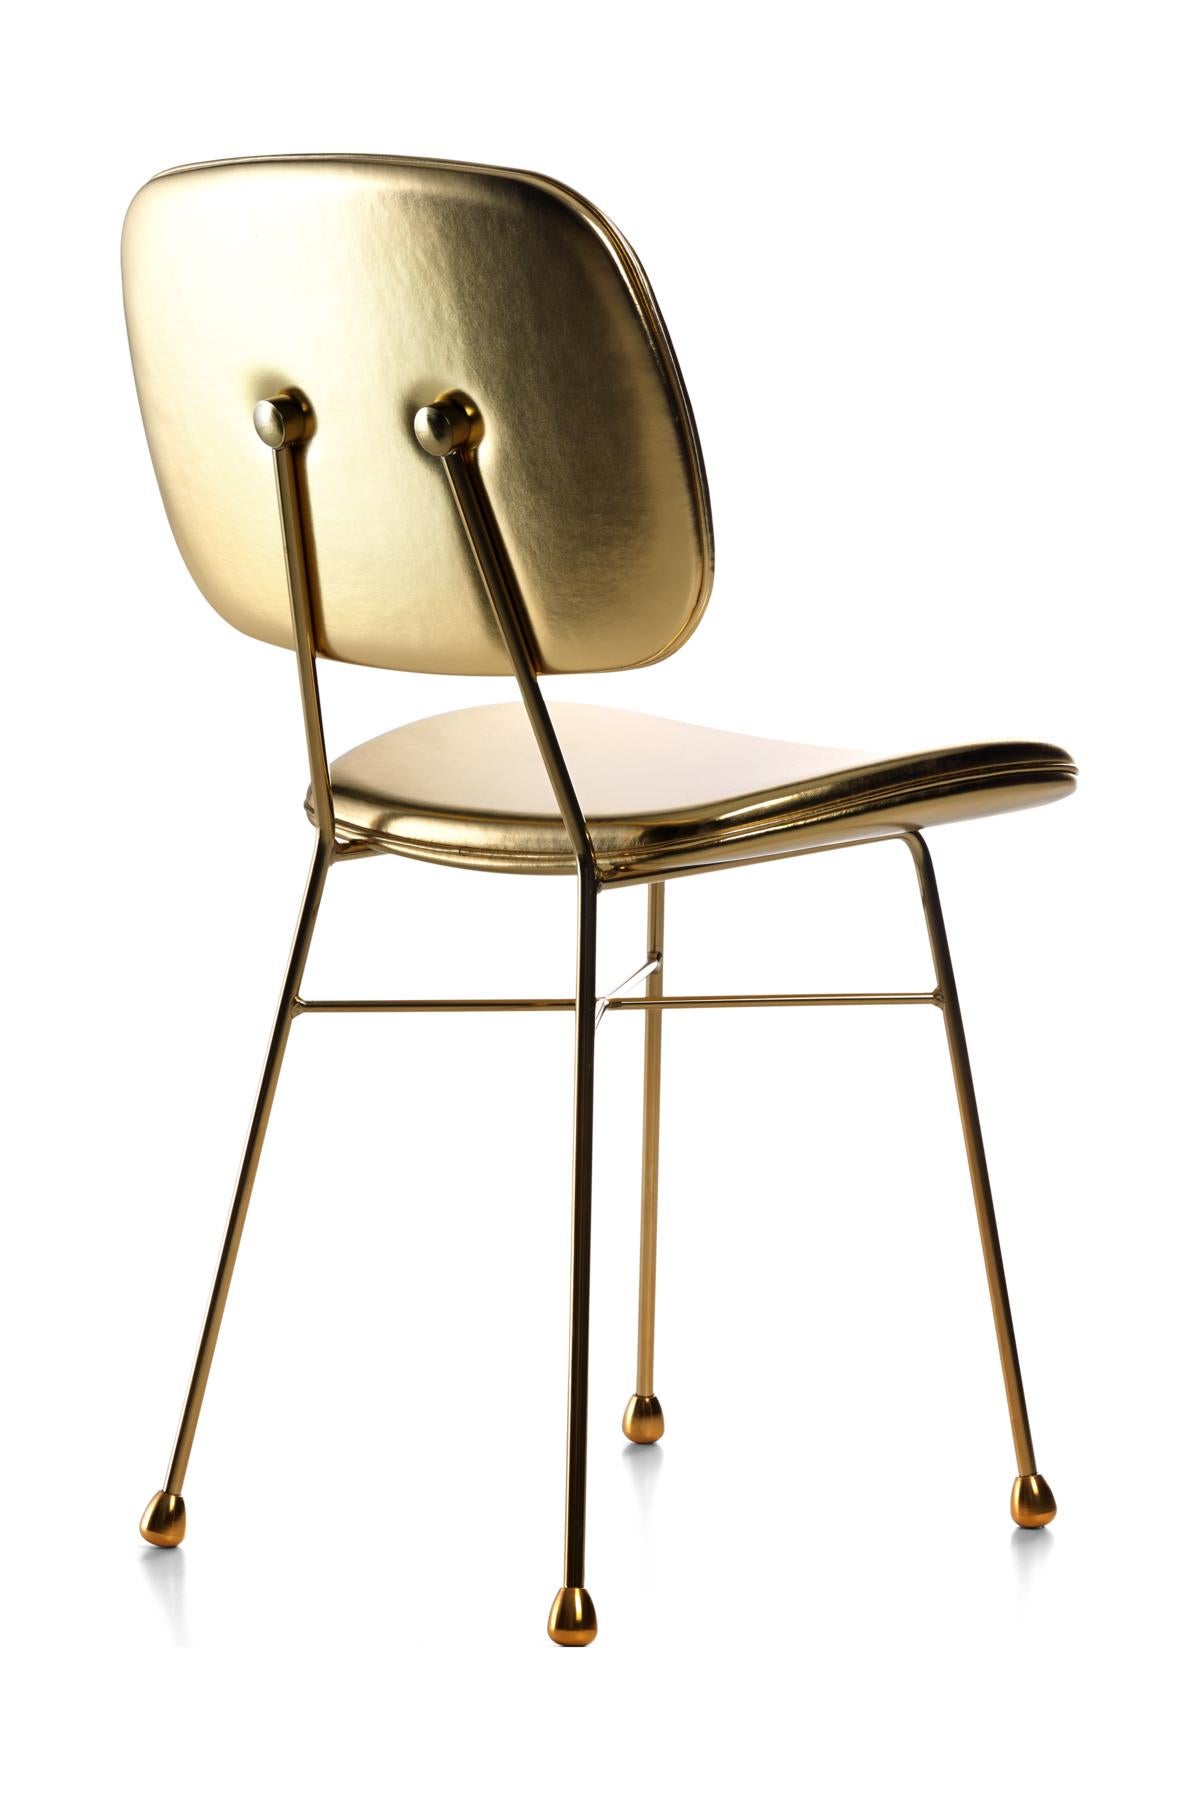 Modern Moooi The Golden Chair in Golden Steel Frame and Upholstery For Sale